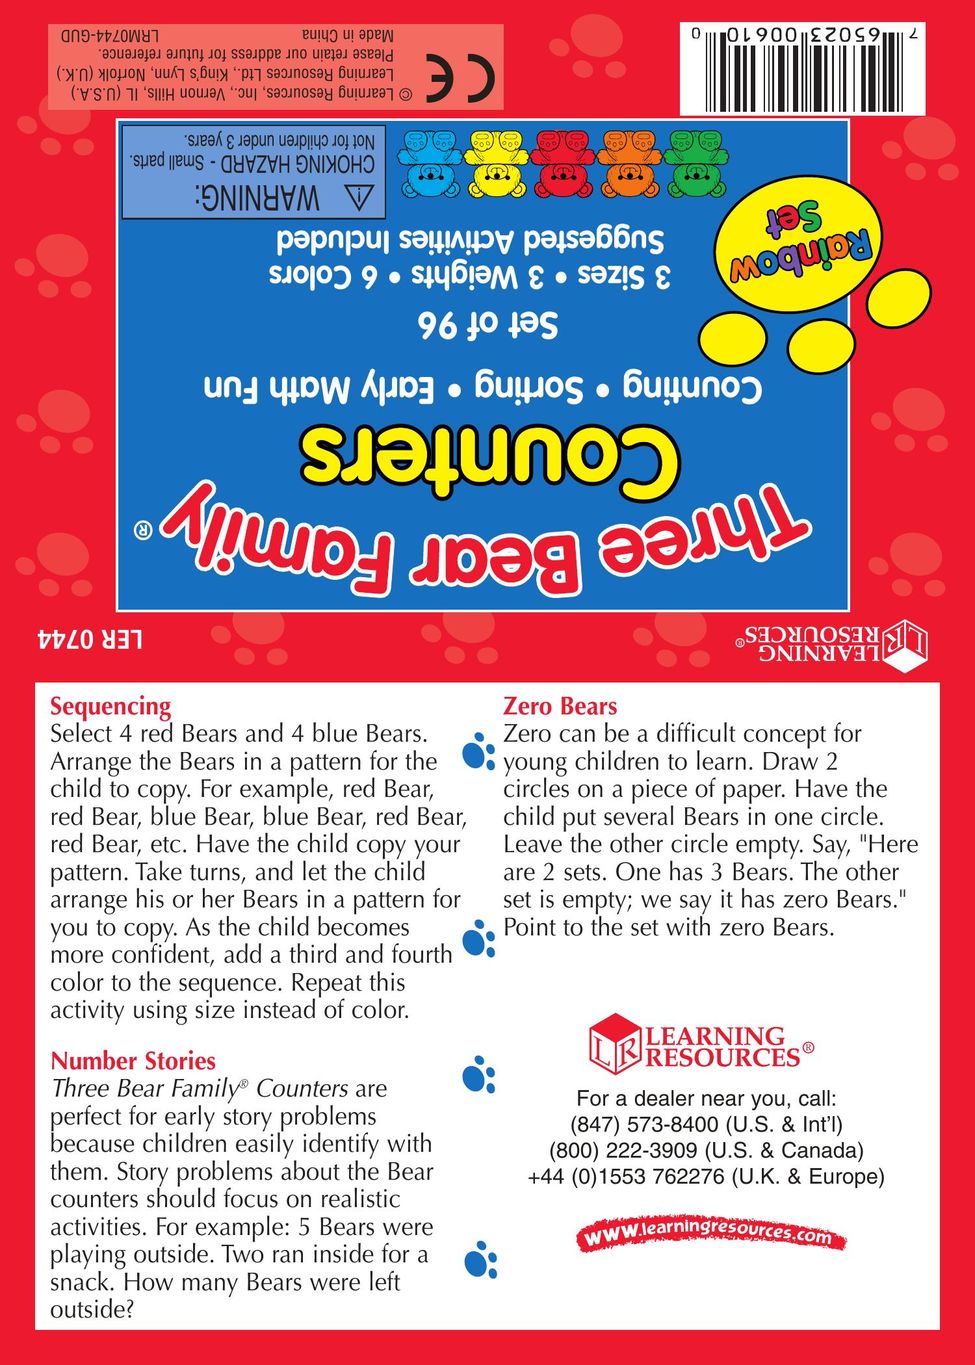 Learning Resources Three Bear Family Games User Manual